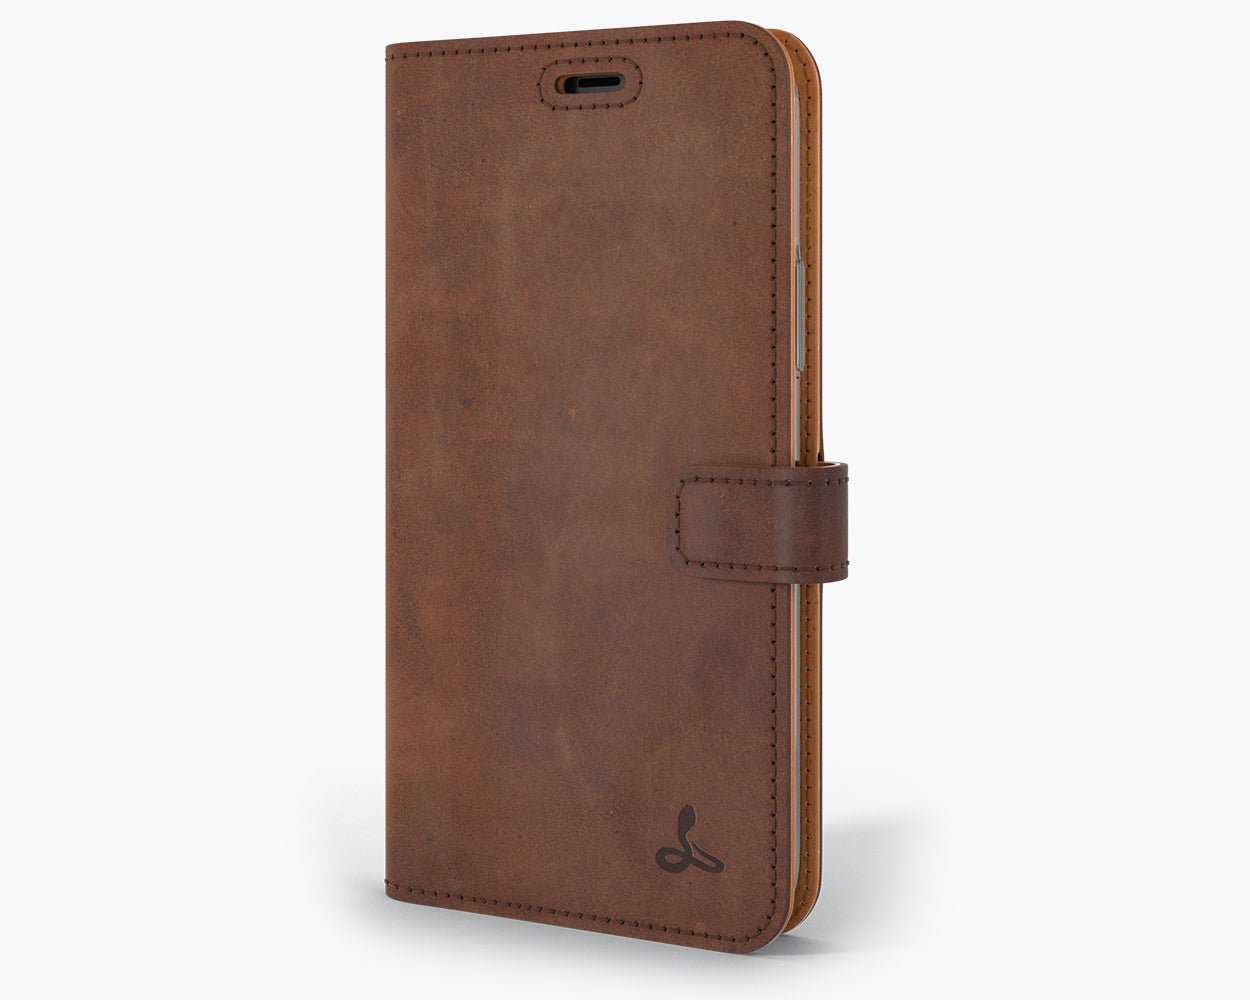 Apple iPhone 11 Pro Max - Vintage Leather Wallet Chestnut Brown Apple iPhone 11 Pro Max - Snakehive UK